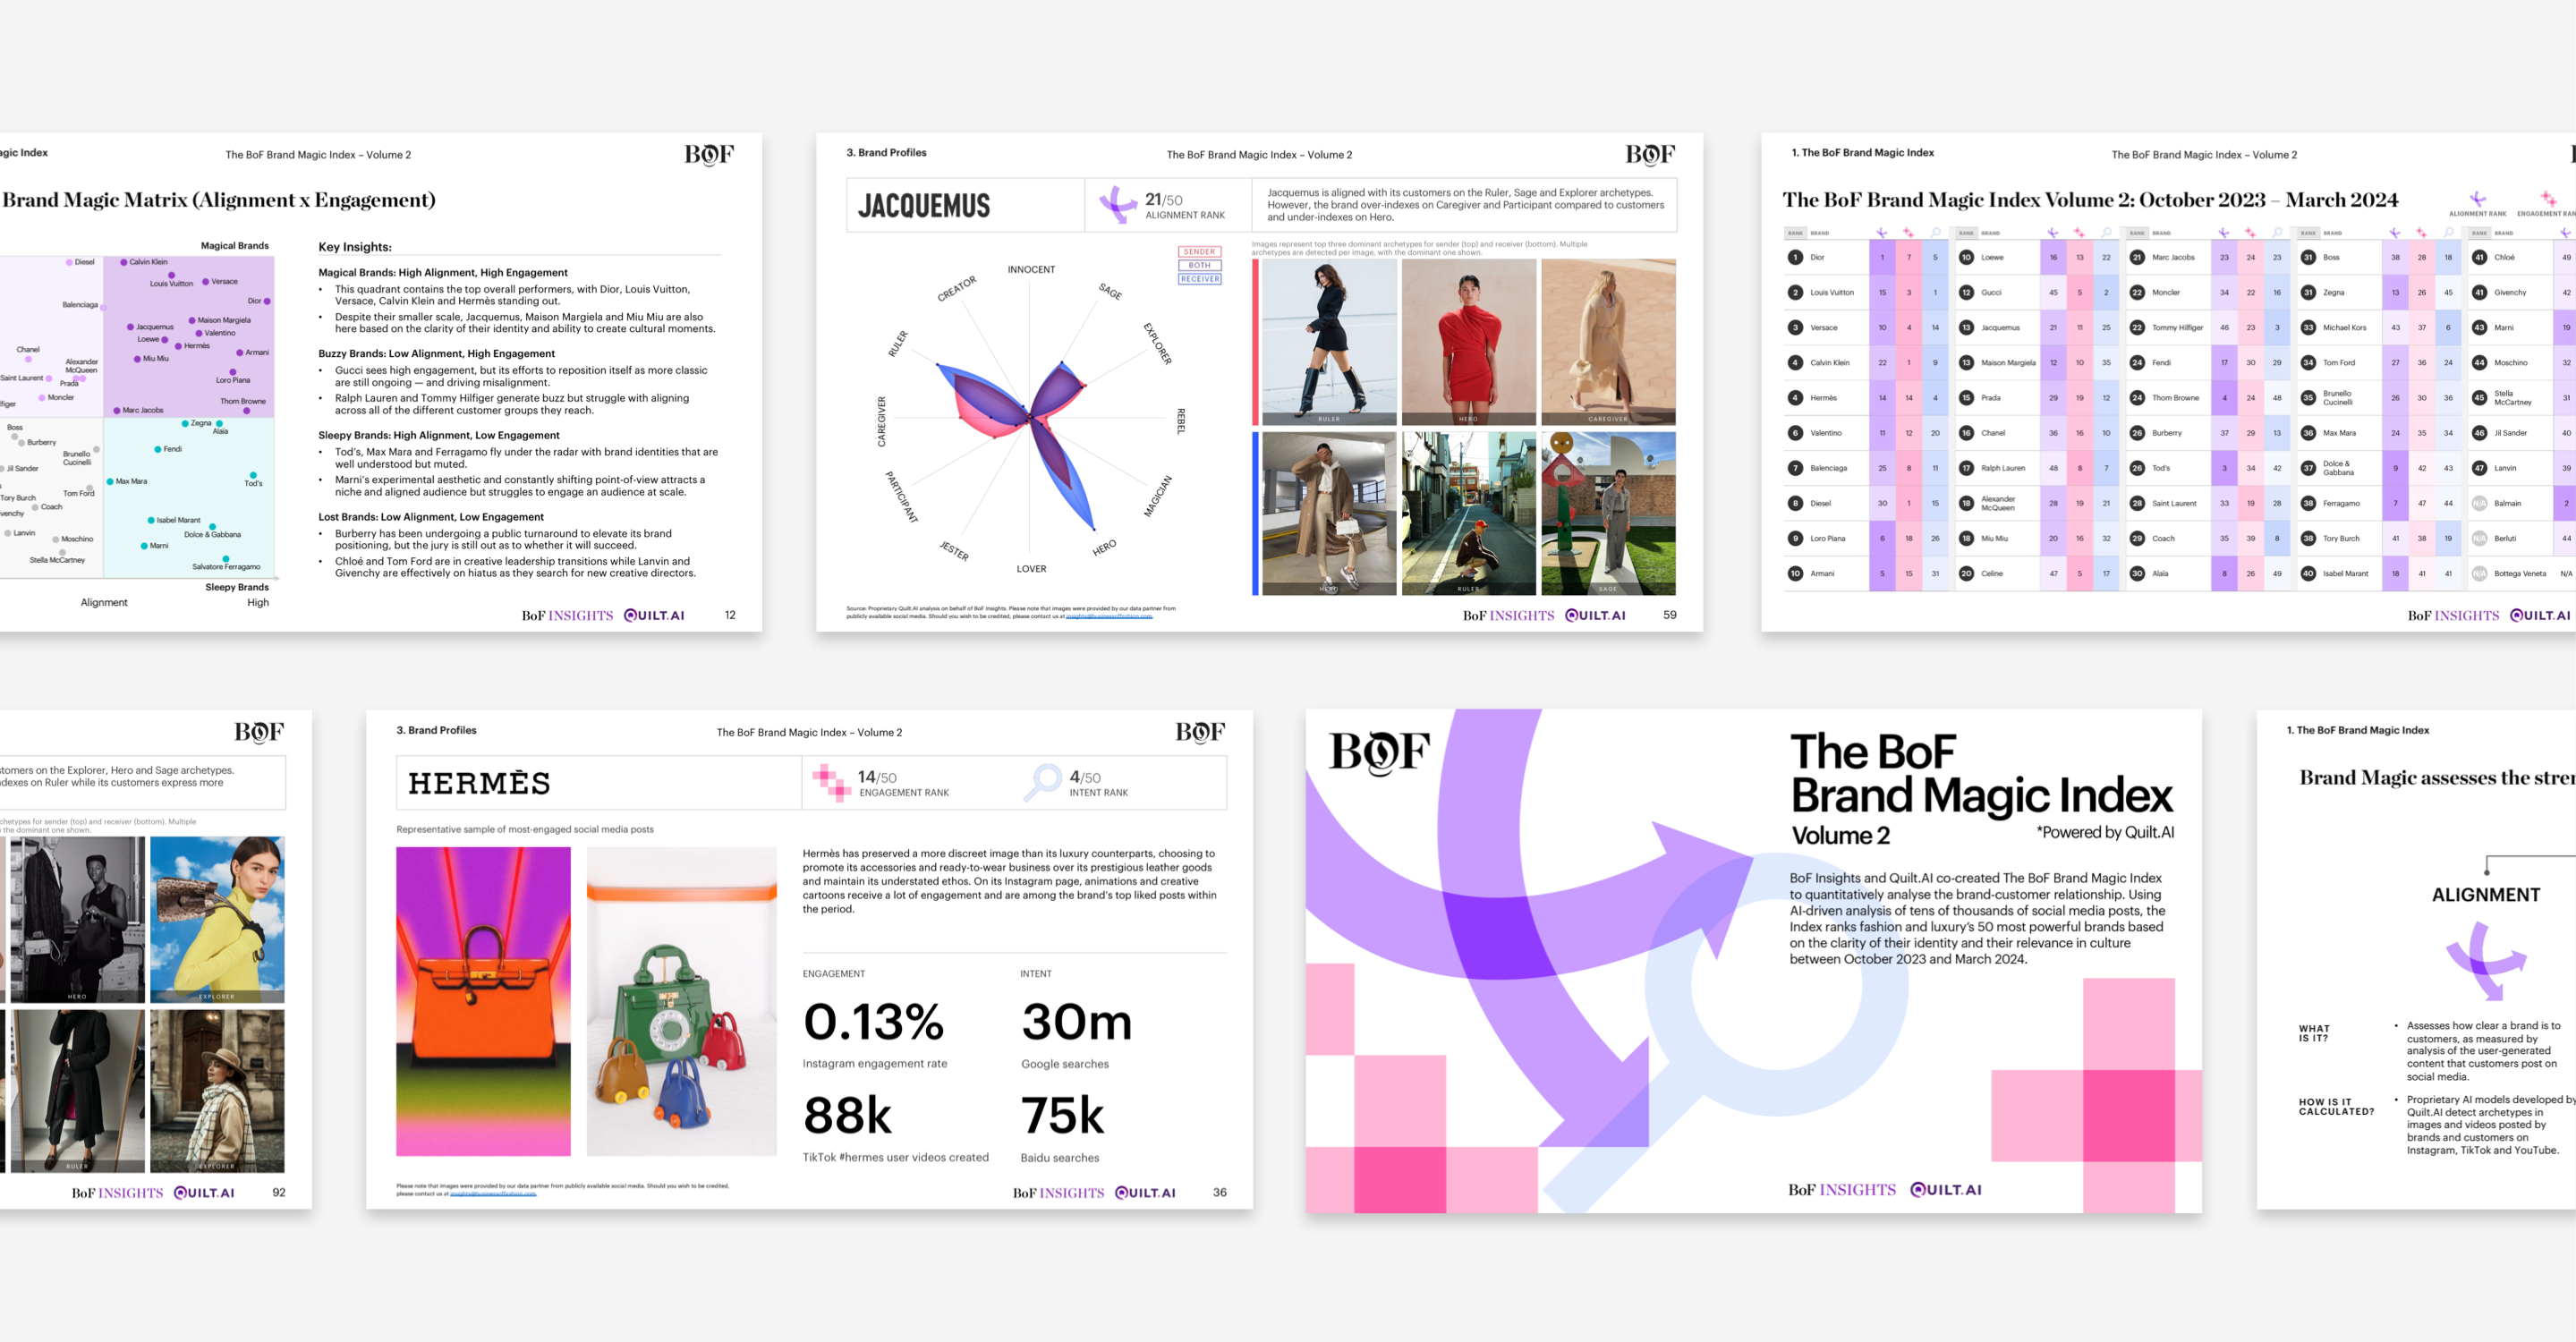 In-depth reports – including BoF Insights reports and full access to The BoF Brand Magic Index